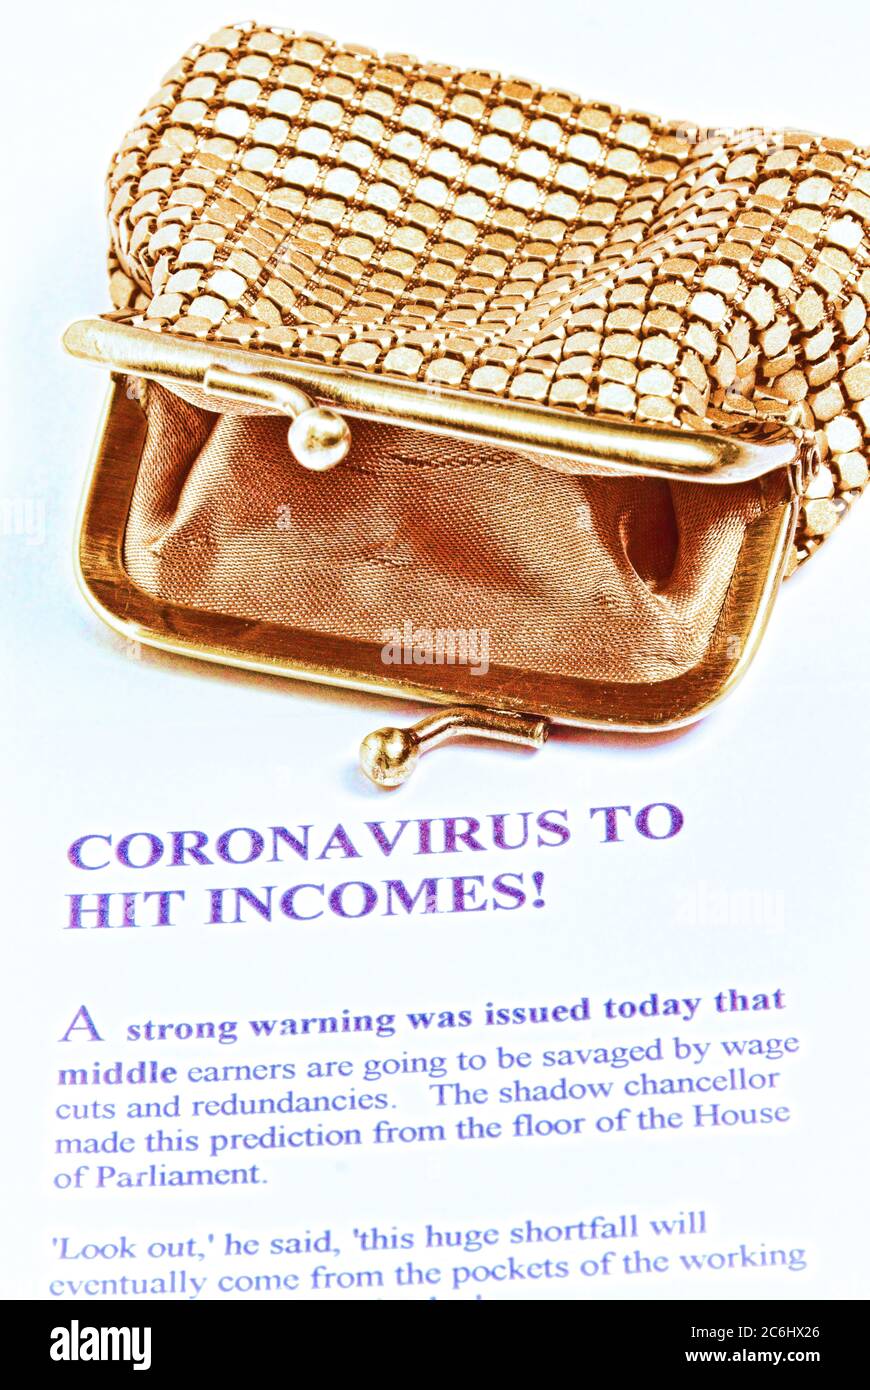 Financial concept image. Cost of  Covid 19 to economy and savings. Empty gold purse.   Imaginary article about costs of Coronavirus to working people. Stock Photo